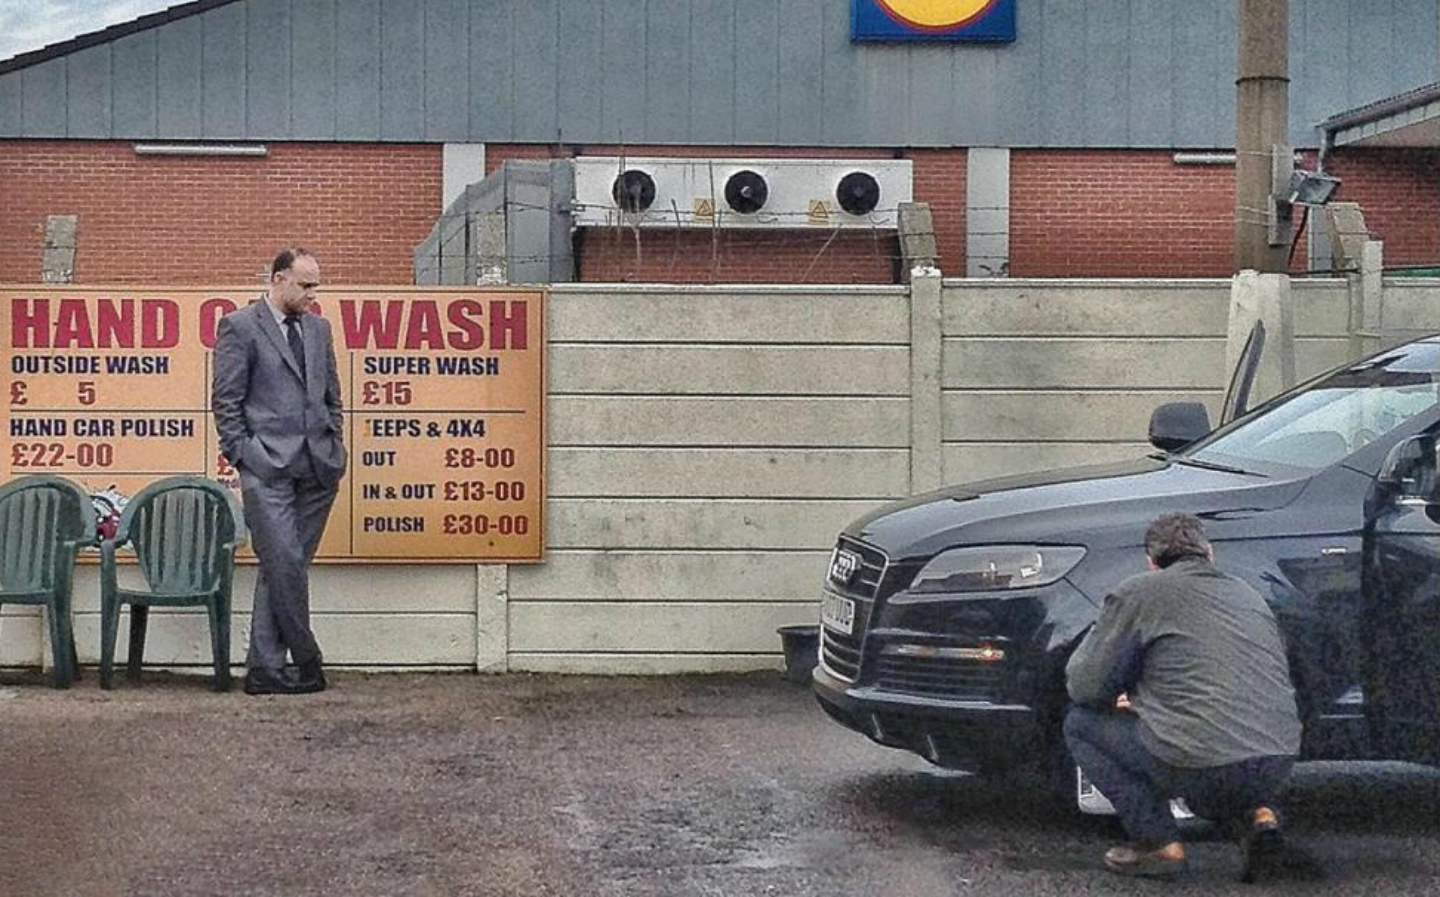 Environmental audit committee launches enquiry into hand car washes